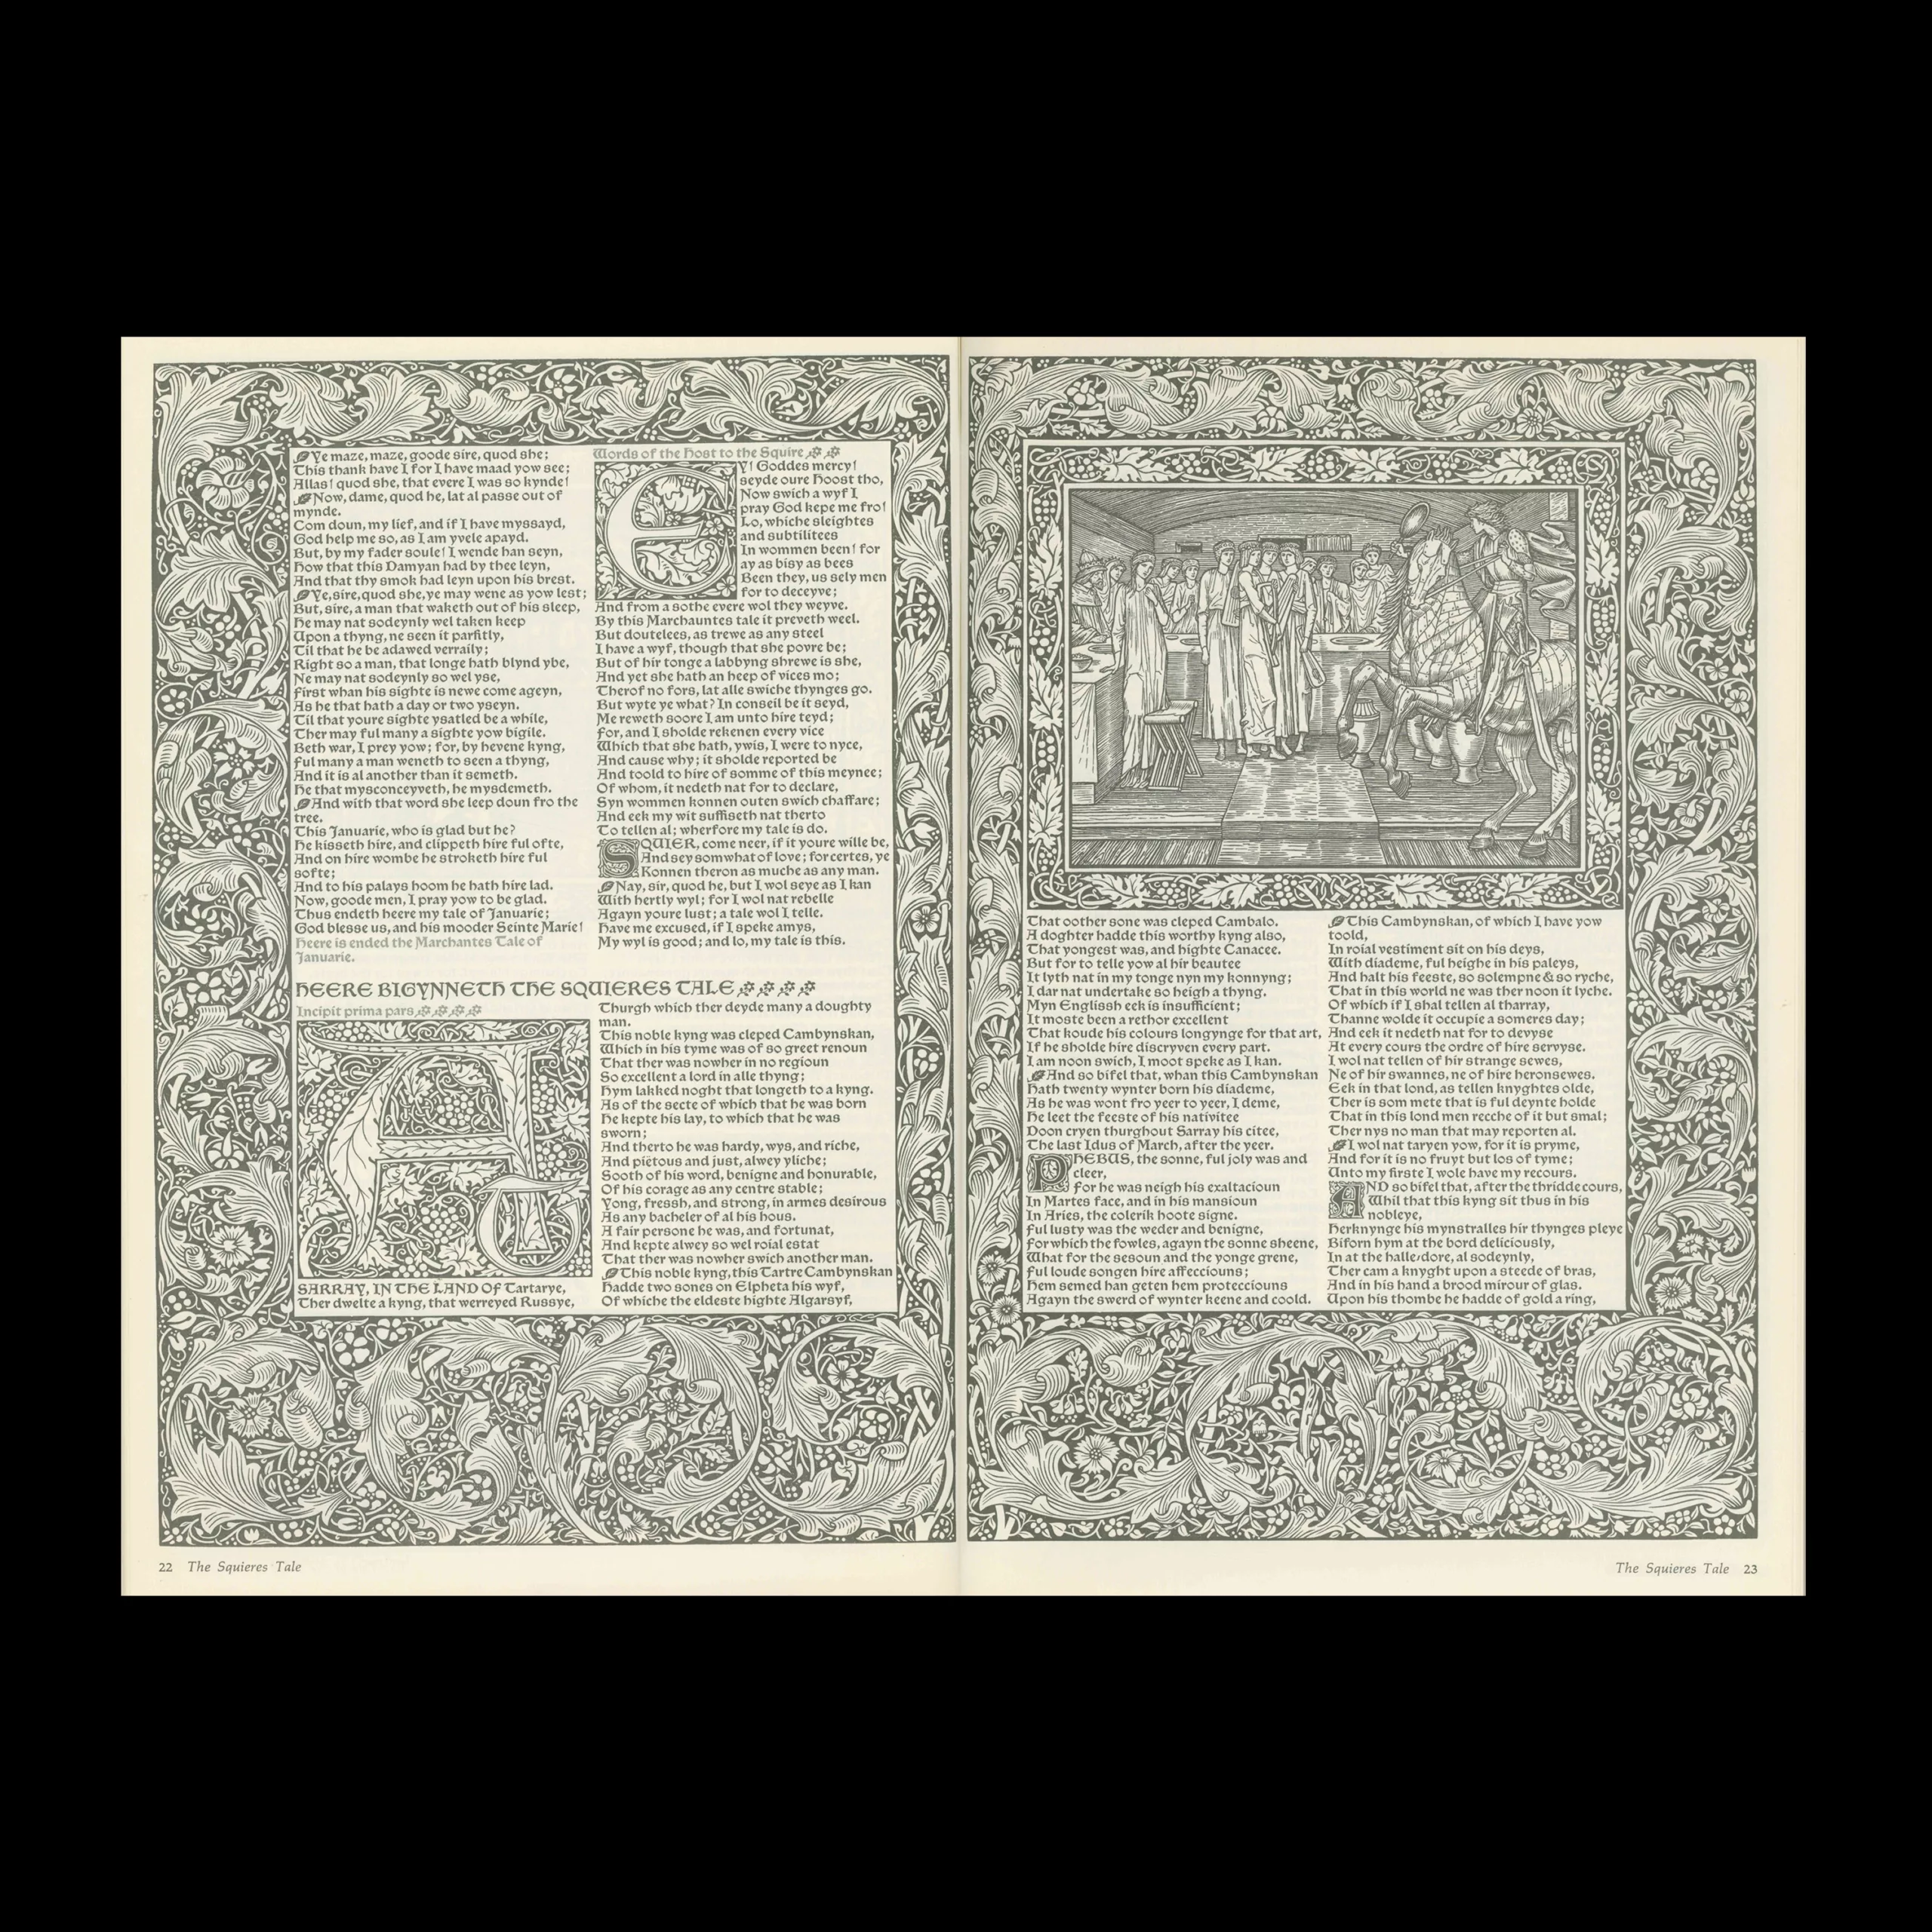 William Morris, Ornamentation and Illustrations from the Kelmscott Chaucer, Dover Pictorial Archives, 1974